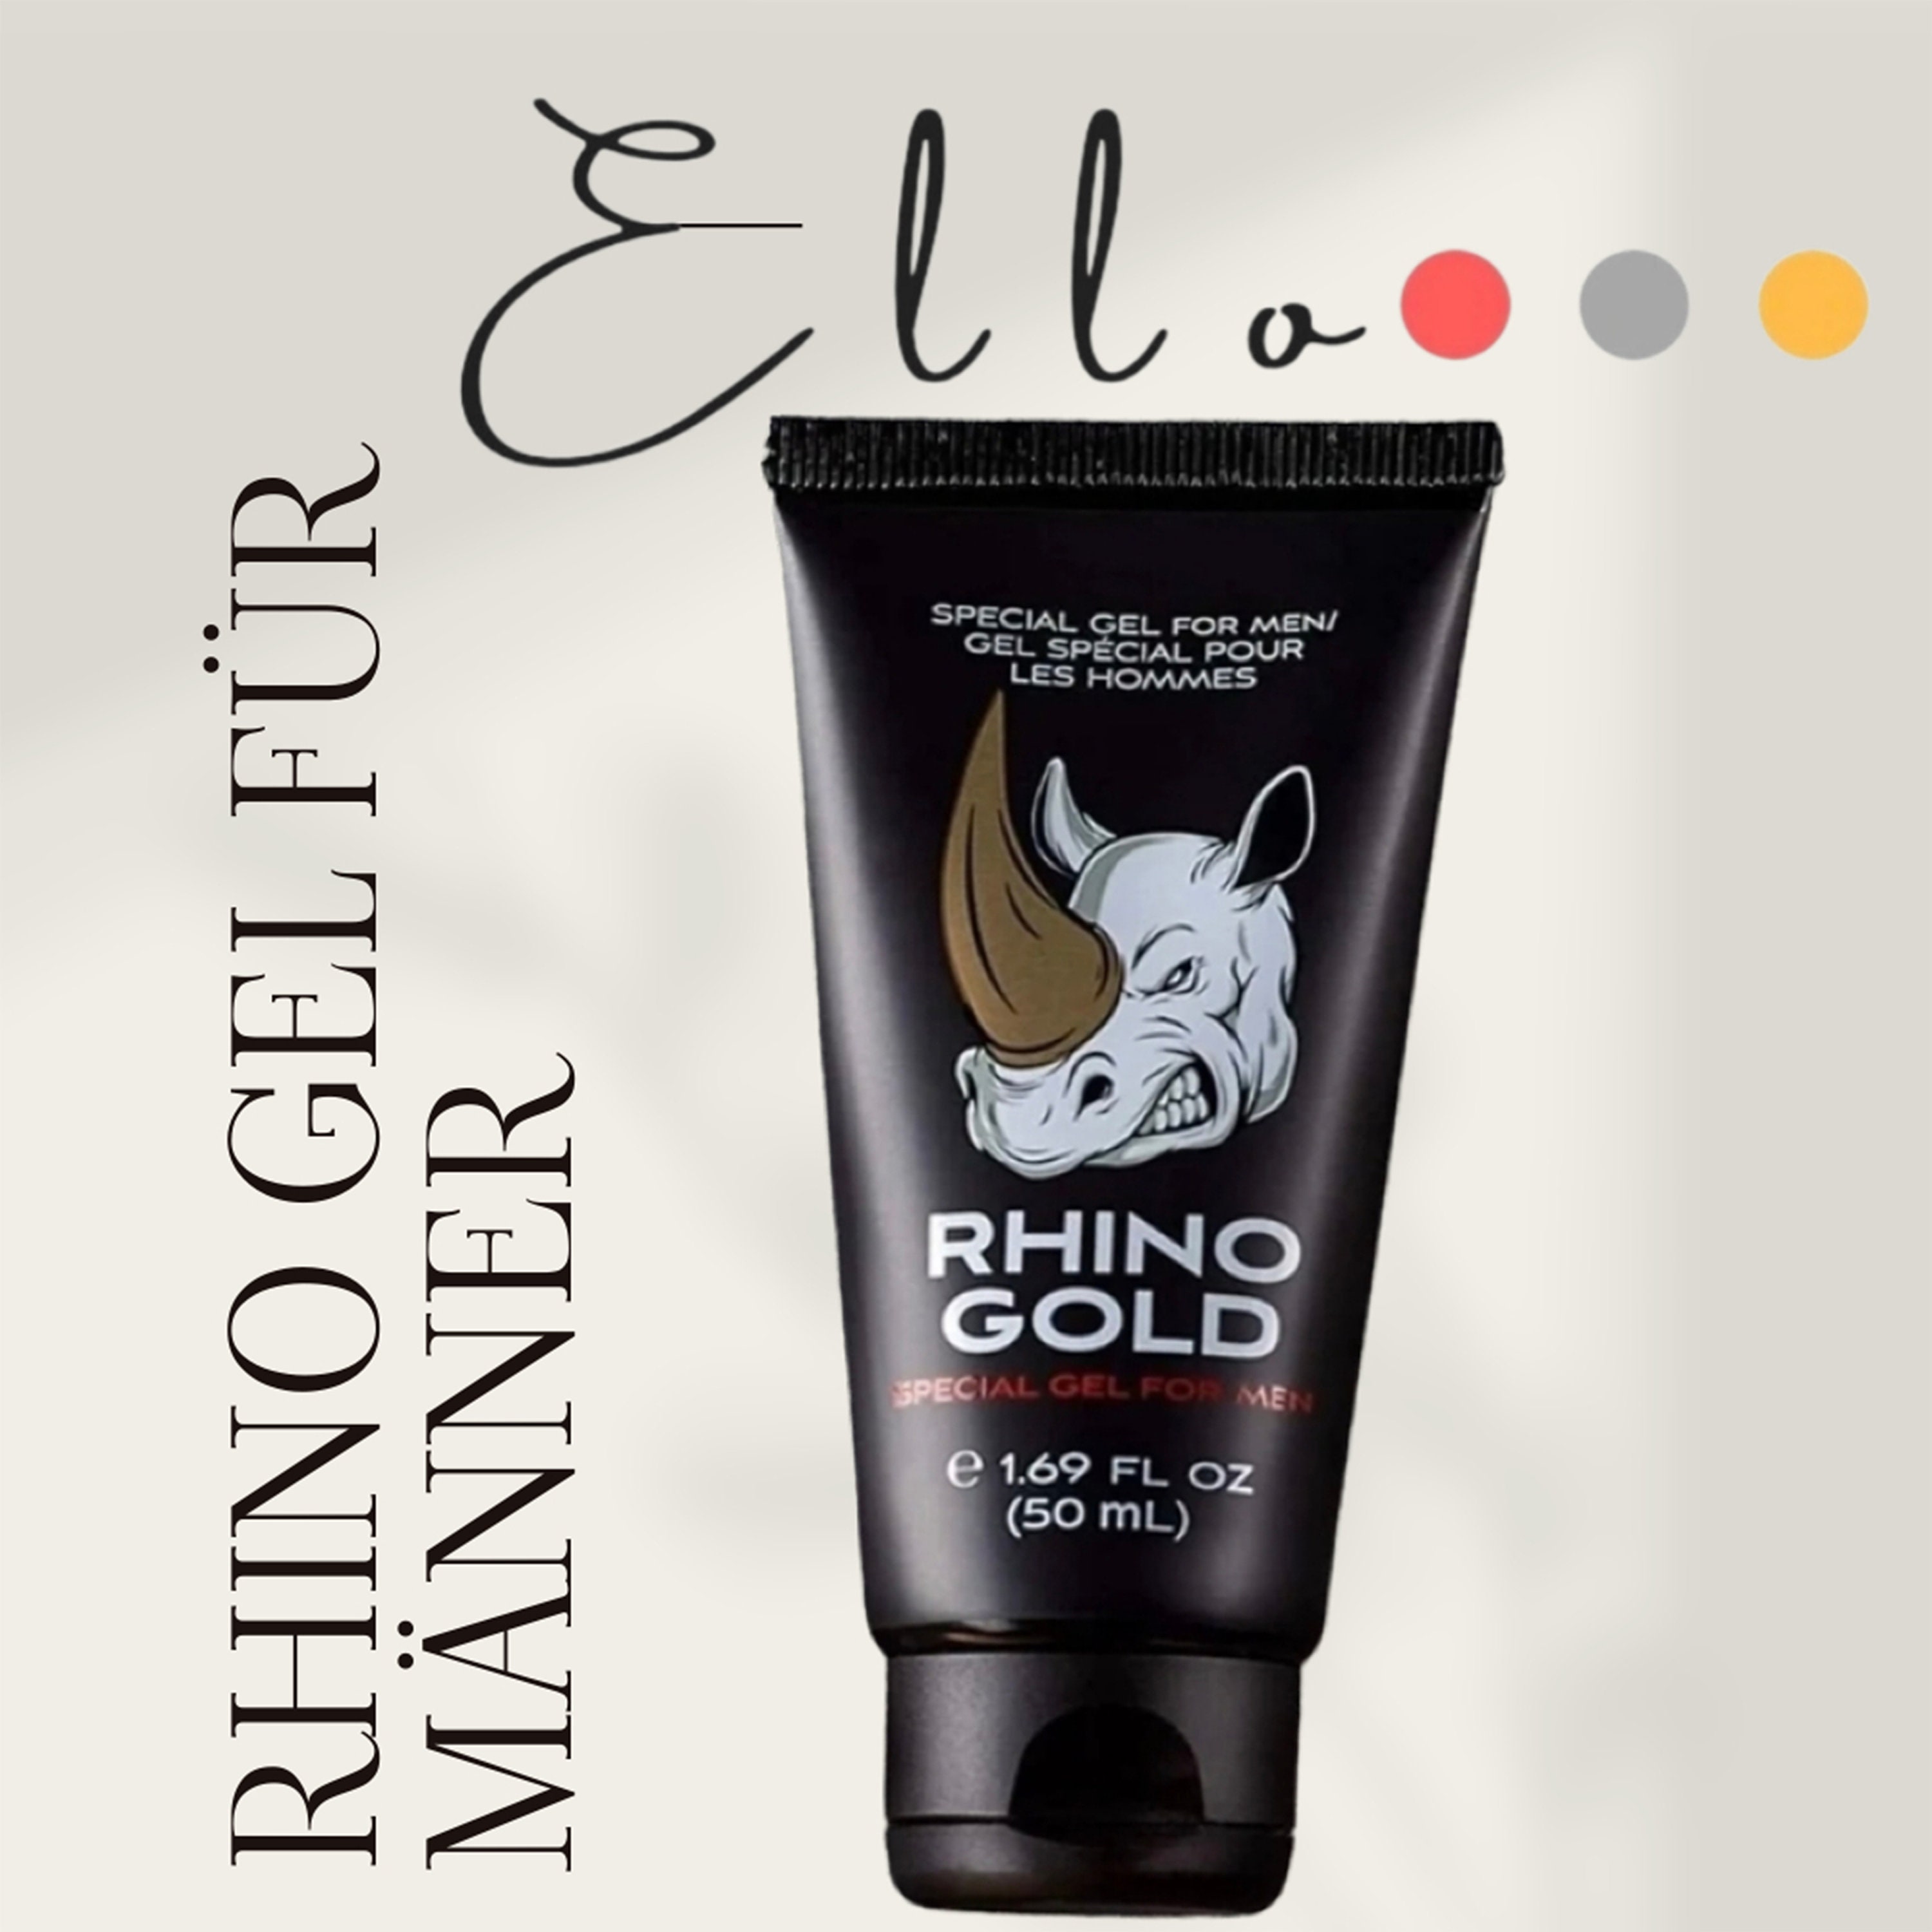 How to Use Rhino Gold Gel to Get Long-Lasting Erection in a Short